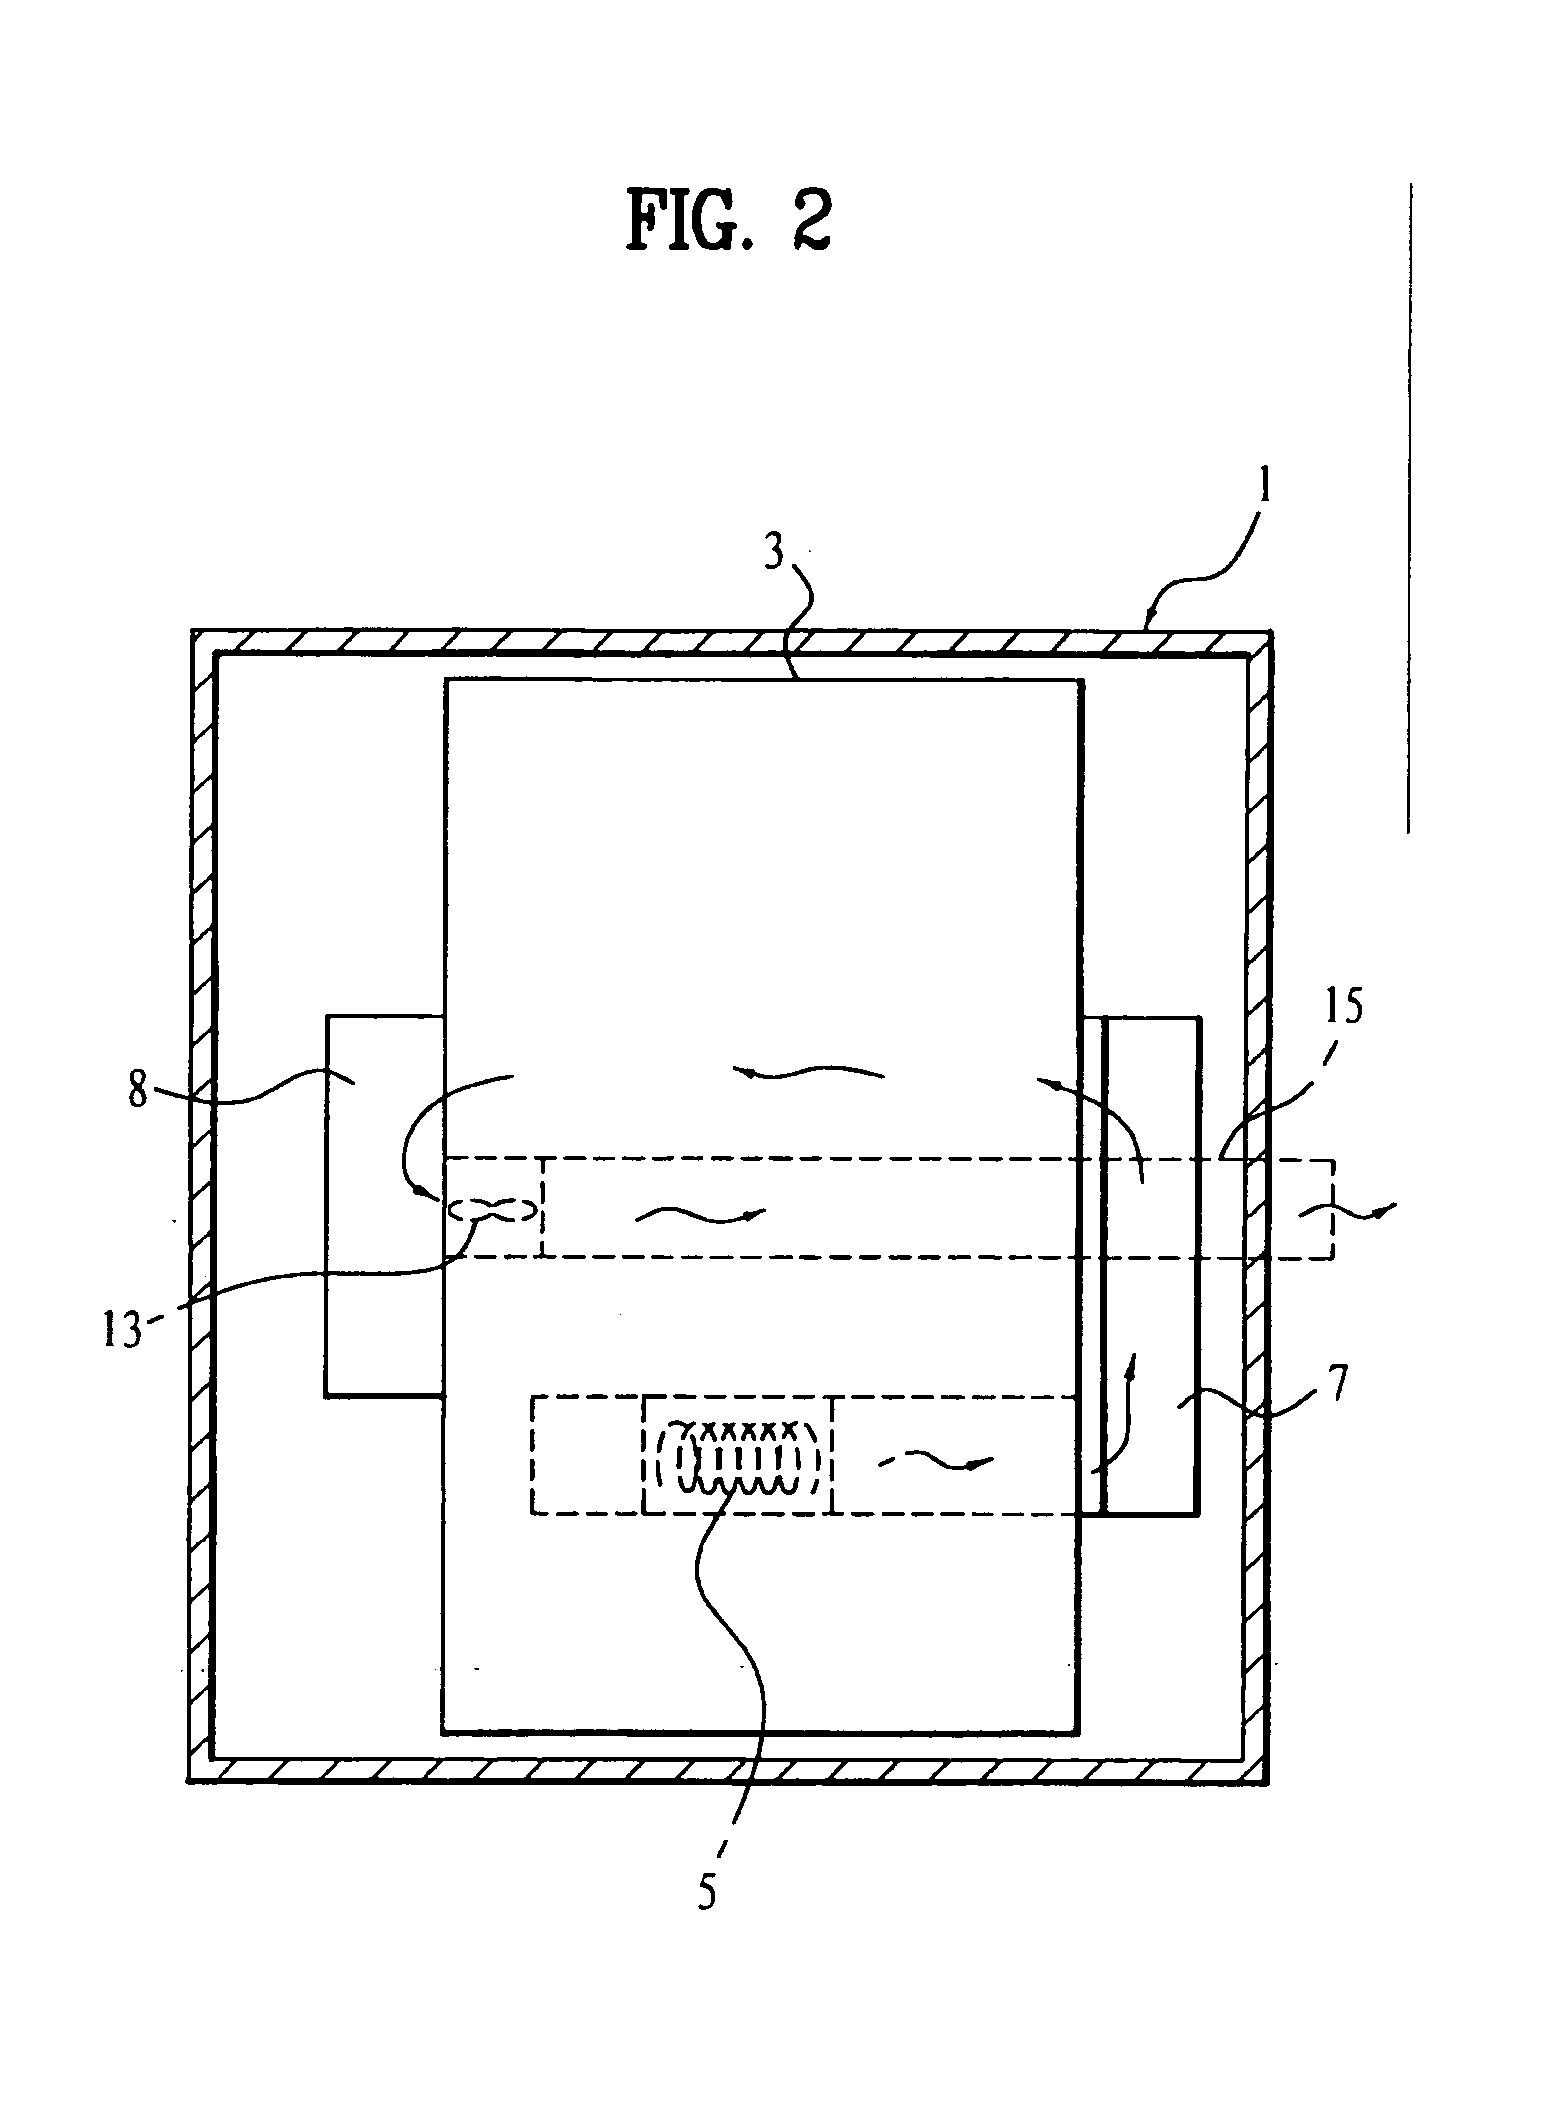 Laundry dryer and method for controlling drying course of the same